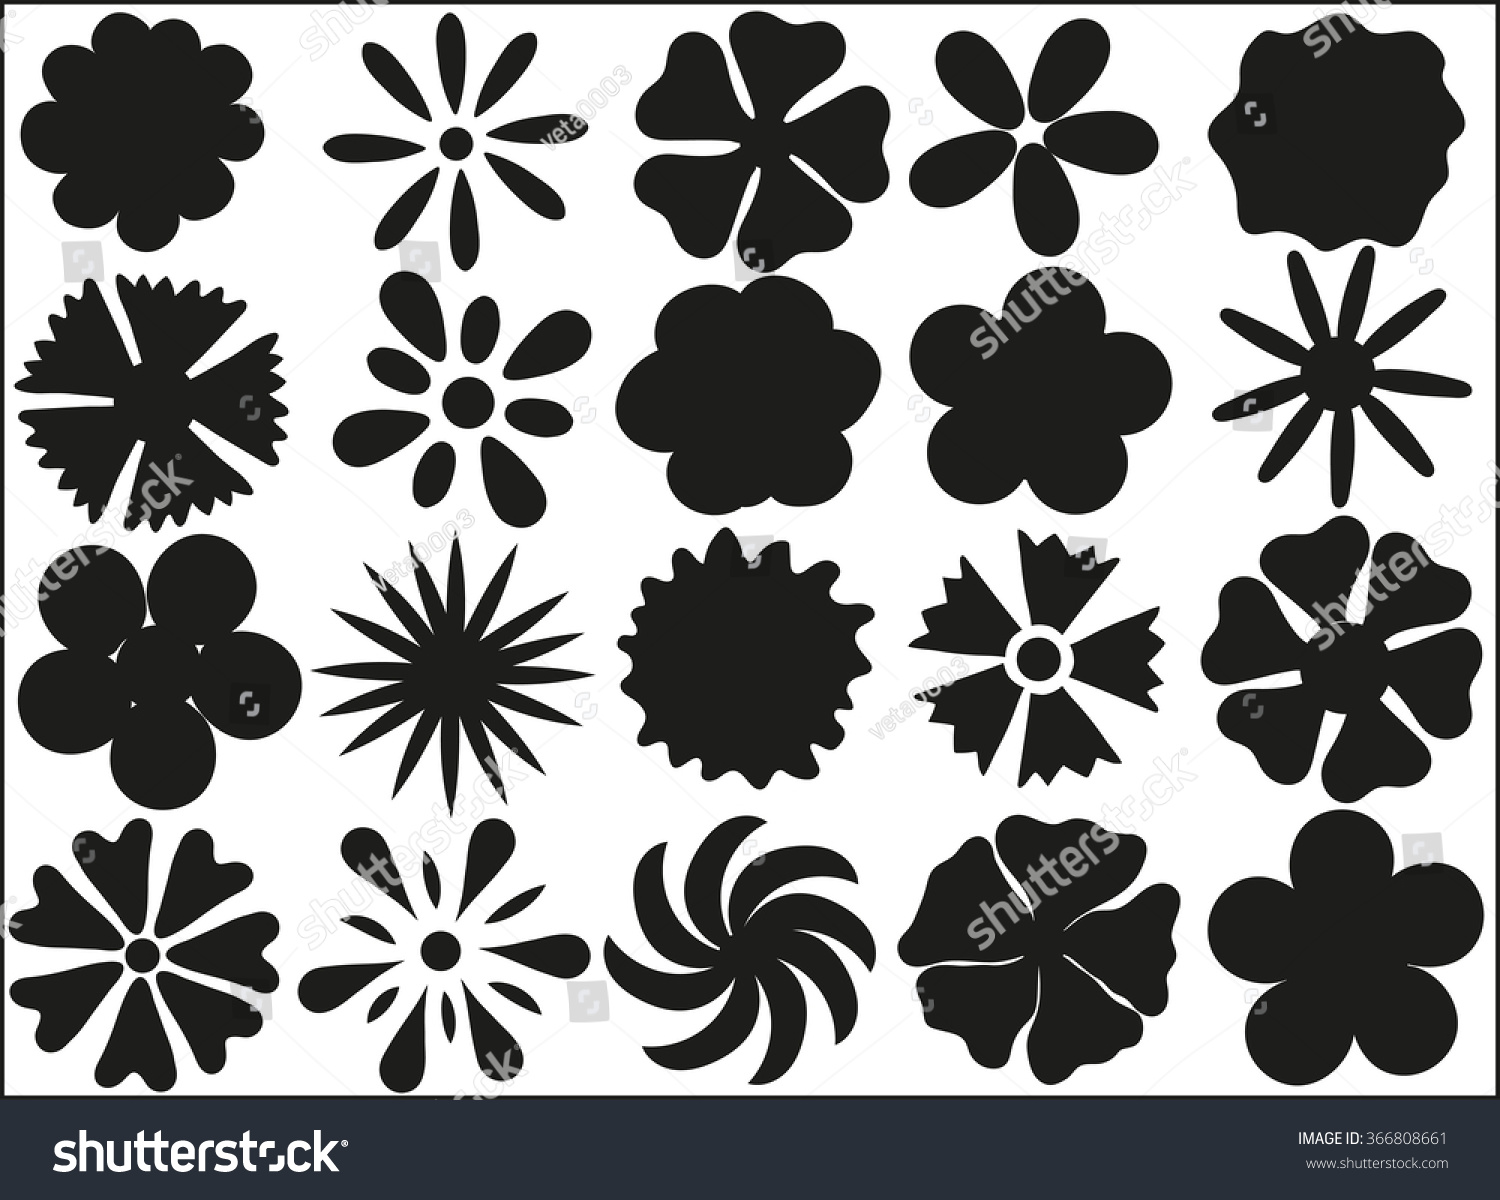 Silhouettes Flowers On White Background Vector Stock Vector 366808661 ...